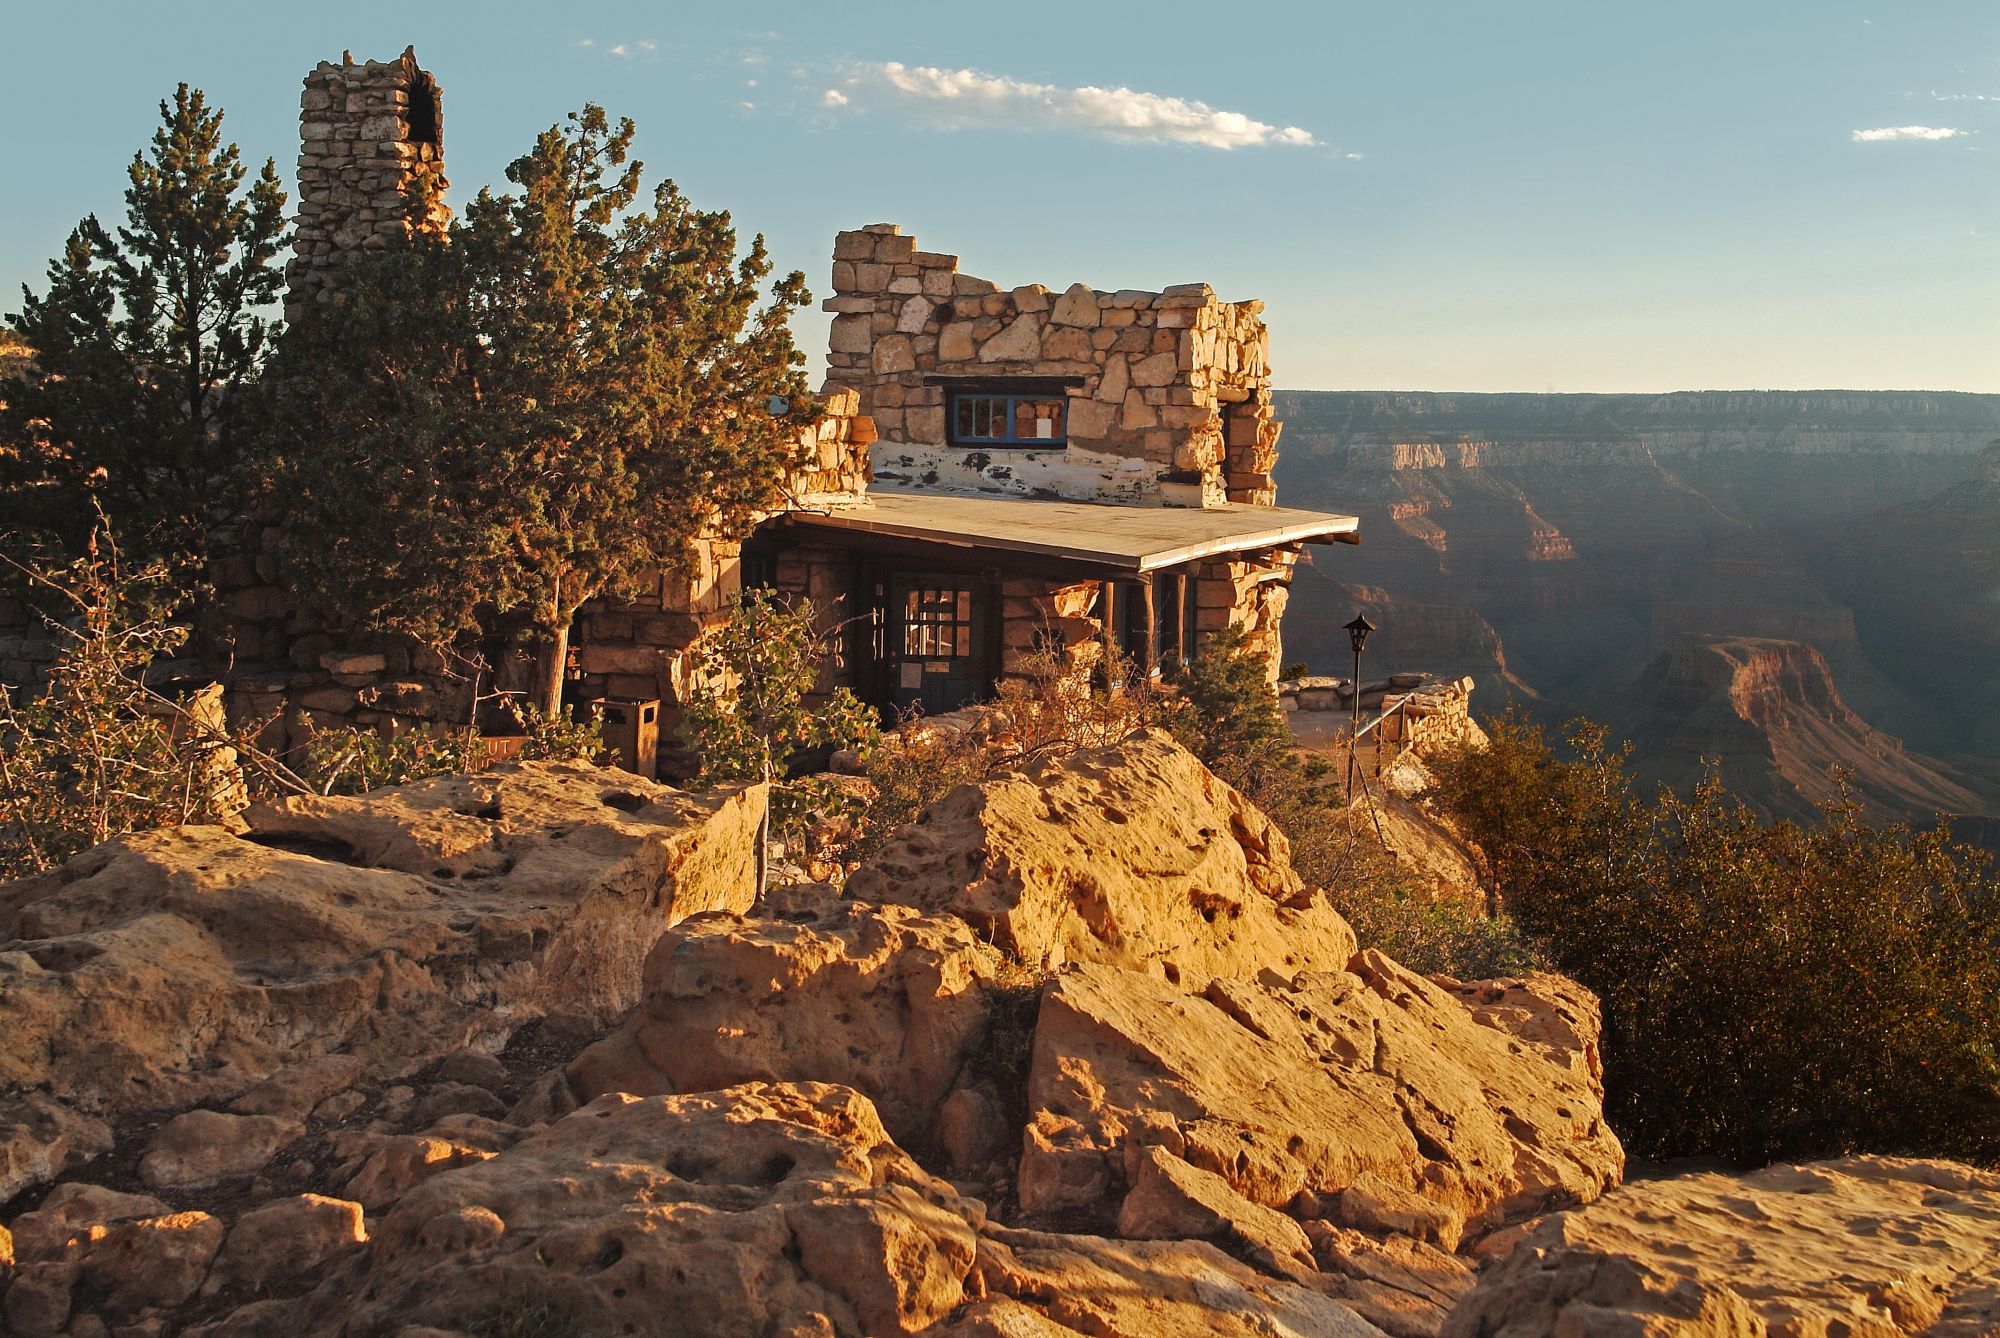 A rustic lookout made of stone sits on the edge of the Grand Canyon.